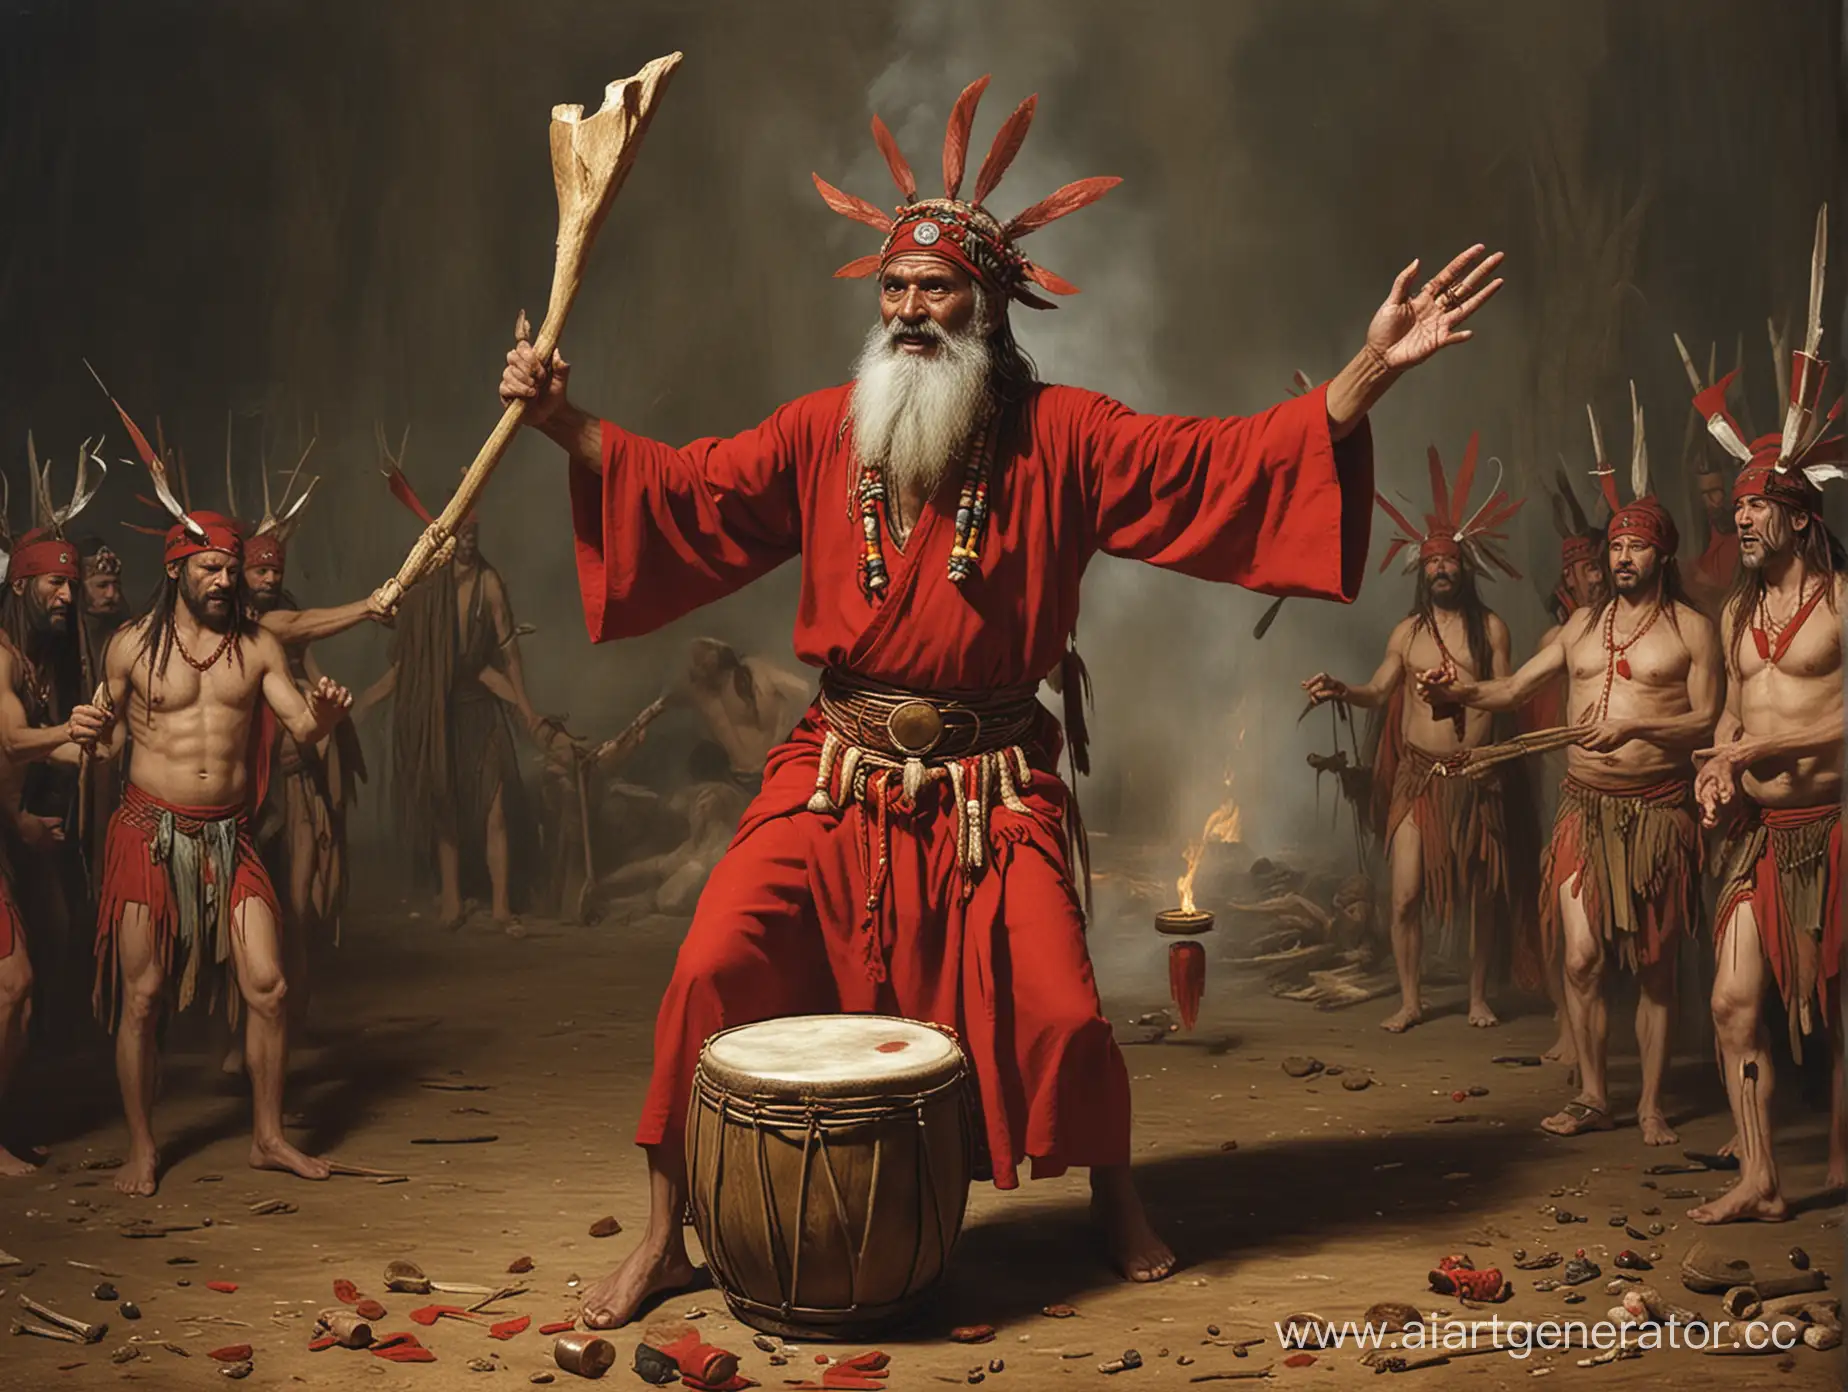 Shamanic-Ritual-with-Red-Drum-Sickle-and-Hammer-Devotion-to-Marxist-Teachings